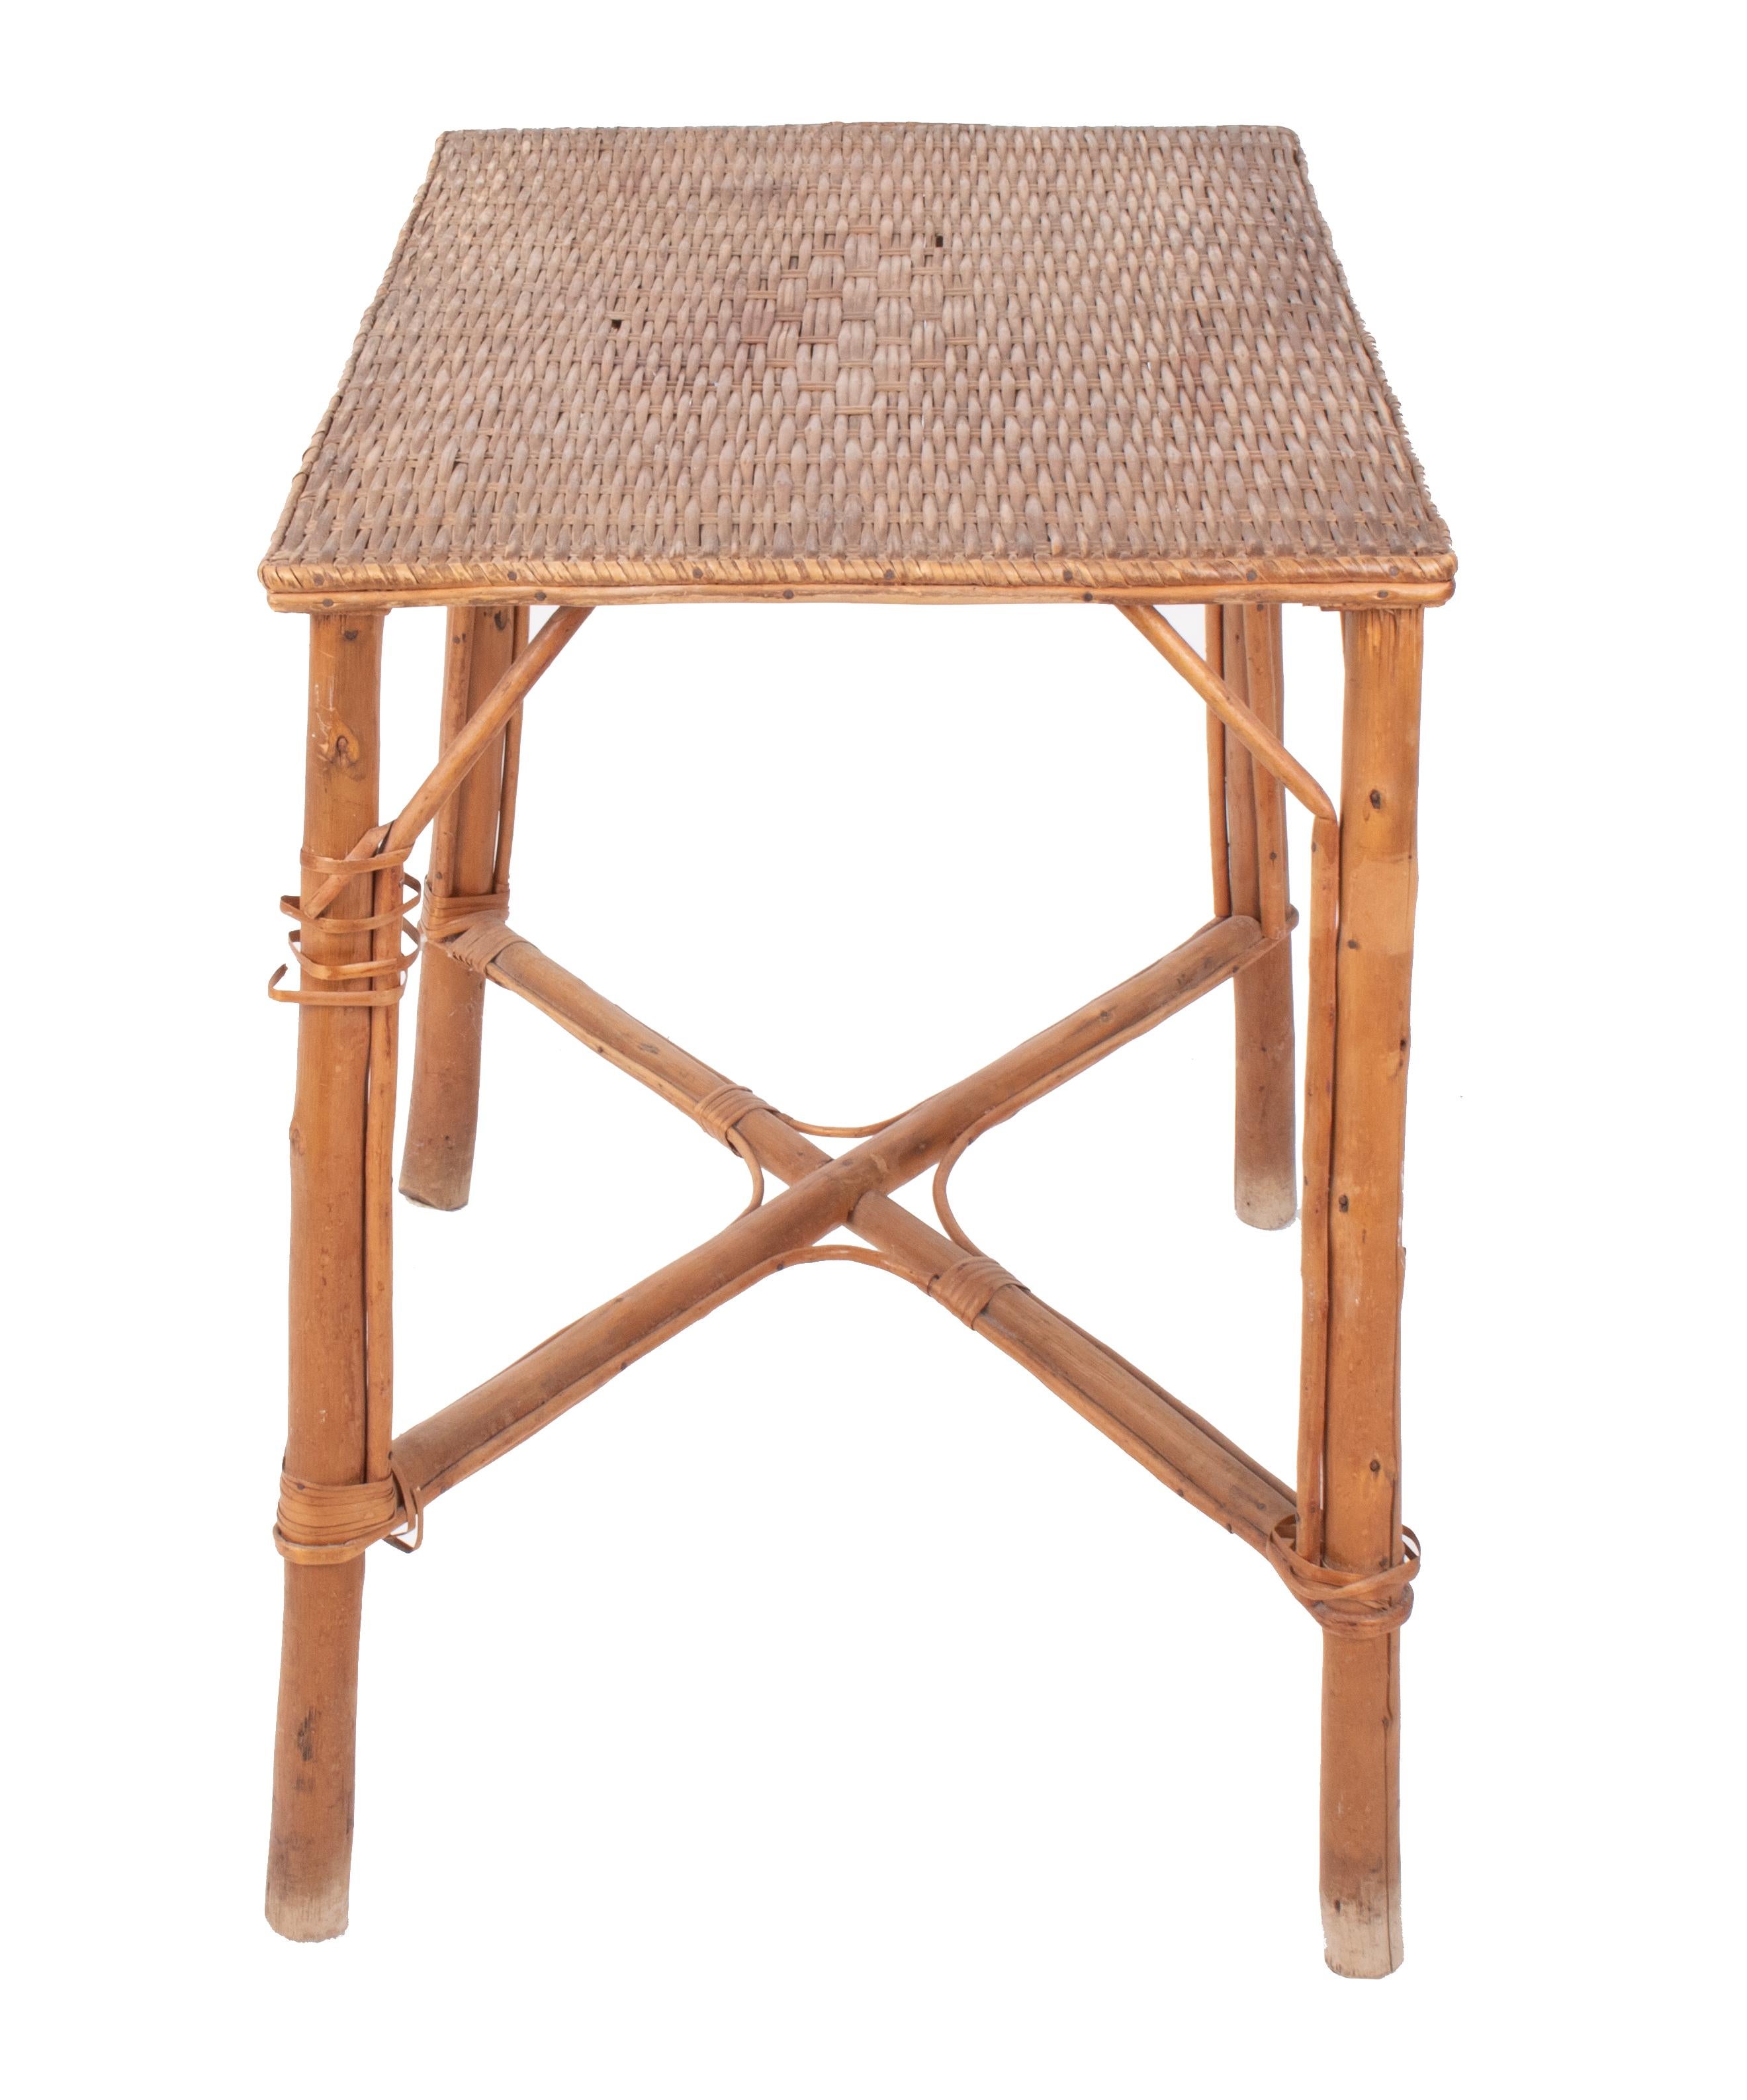 Late 20th Century 1970s Spanish Bamboo and Wicker Side Table For Sale